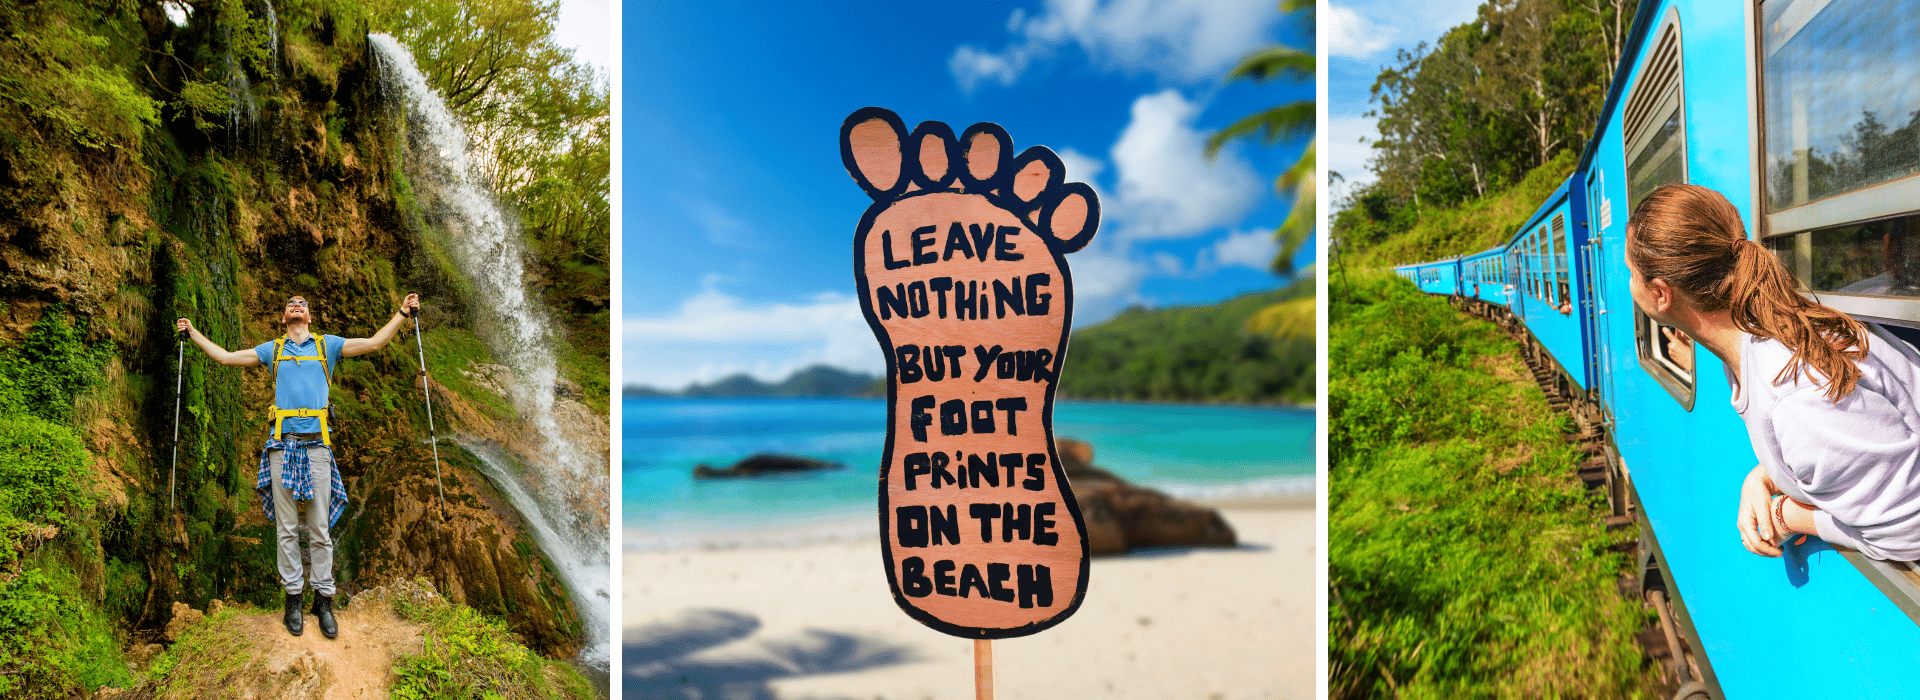 The three photos representing green travel include; a man enjoying nature, a woman on an alternative form of transportation, and a beach sign instructing visitors to leave nothing but their footprints on the beach.